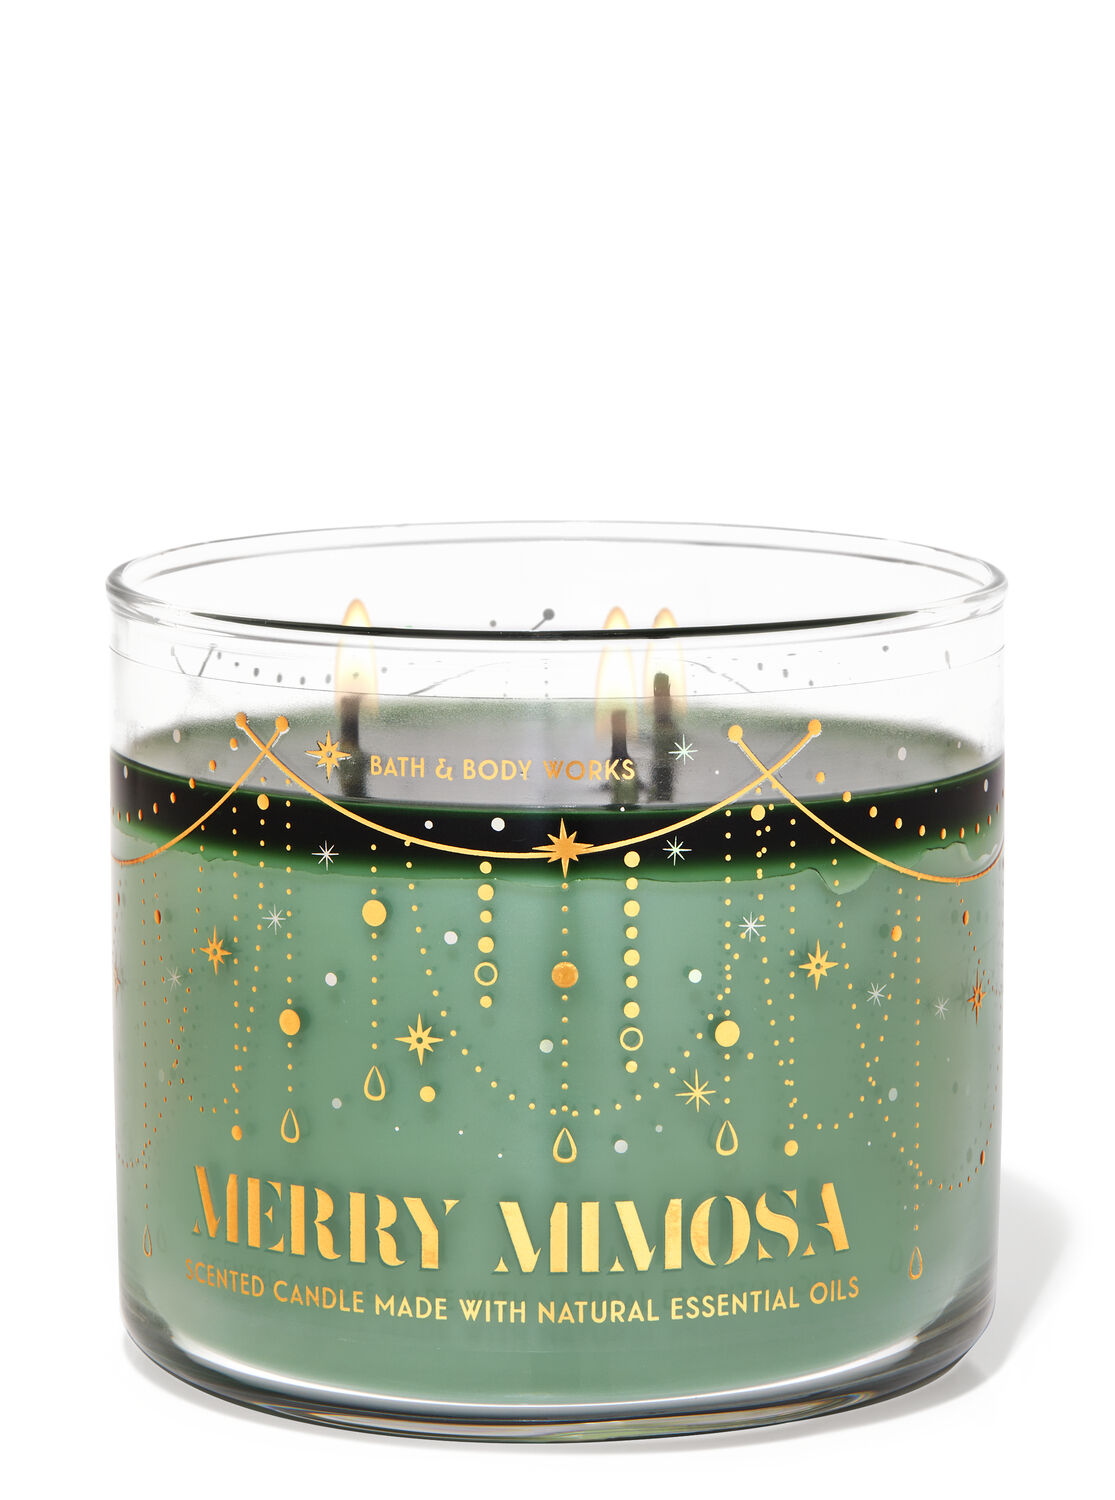 Bath & Body Works Merry Mimosa Candle 3 Wick Scented 14.5 Oz Large NEW FREESHIP 